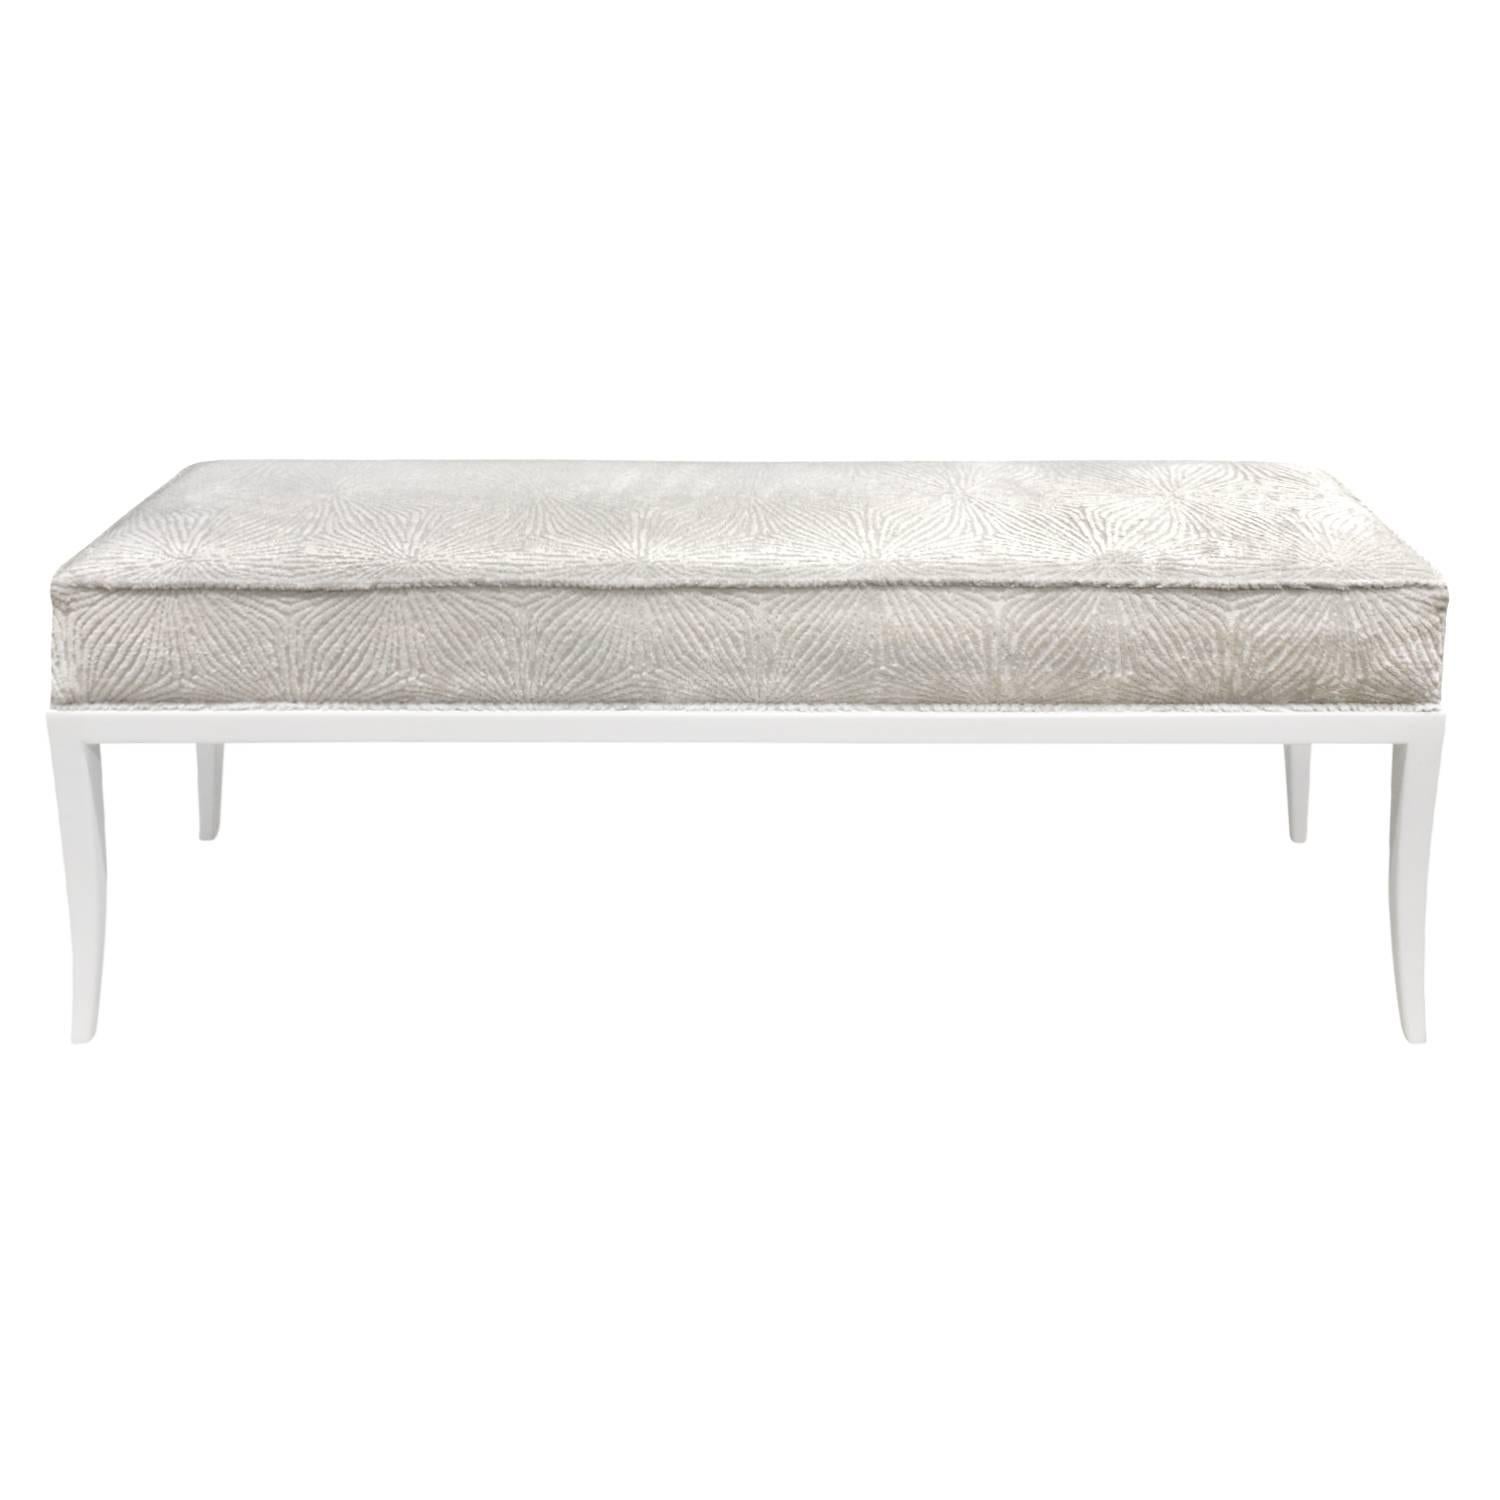 Tommi Parzinger Graceful Bench with White Lacquer Base, 1950s